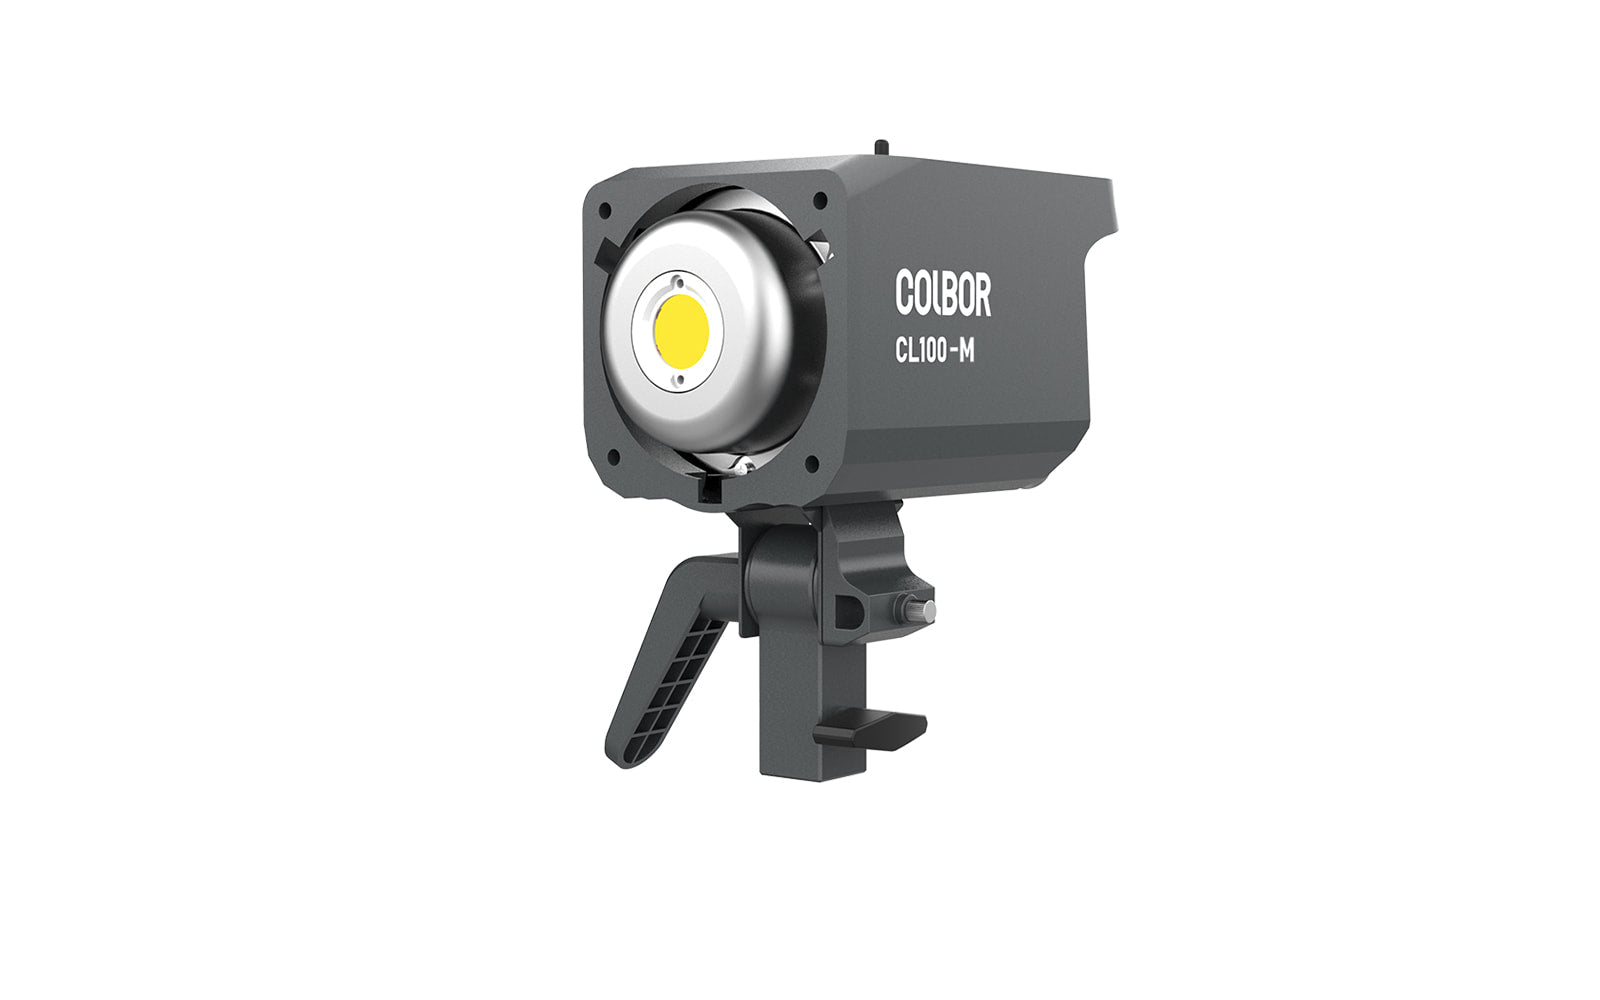 COLBOR CL100-M daylight balanced LED light comes with a light base.